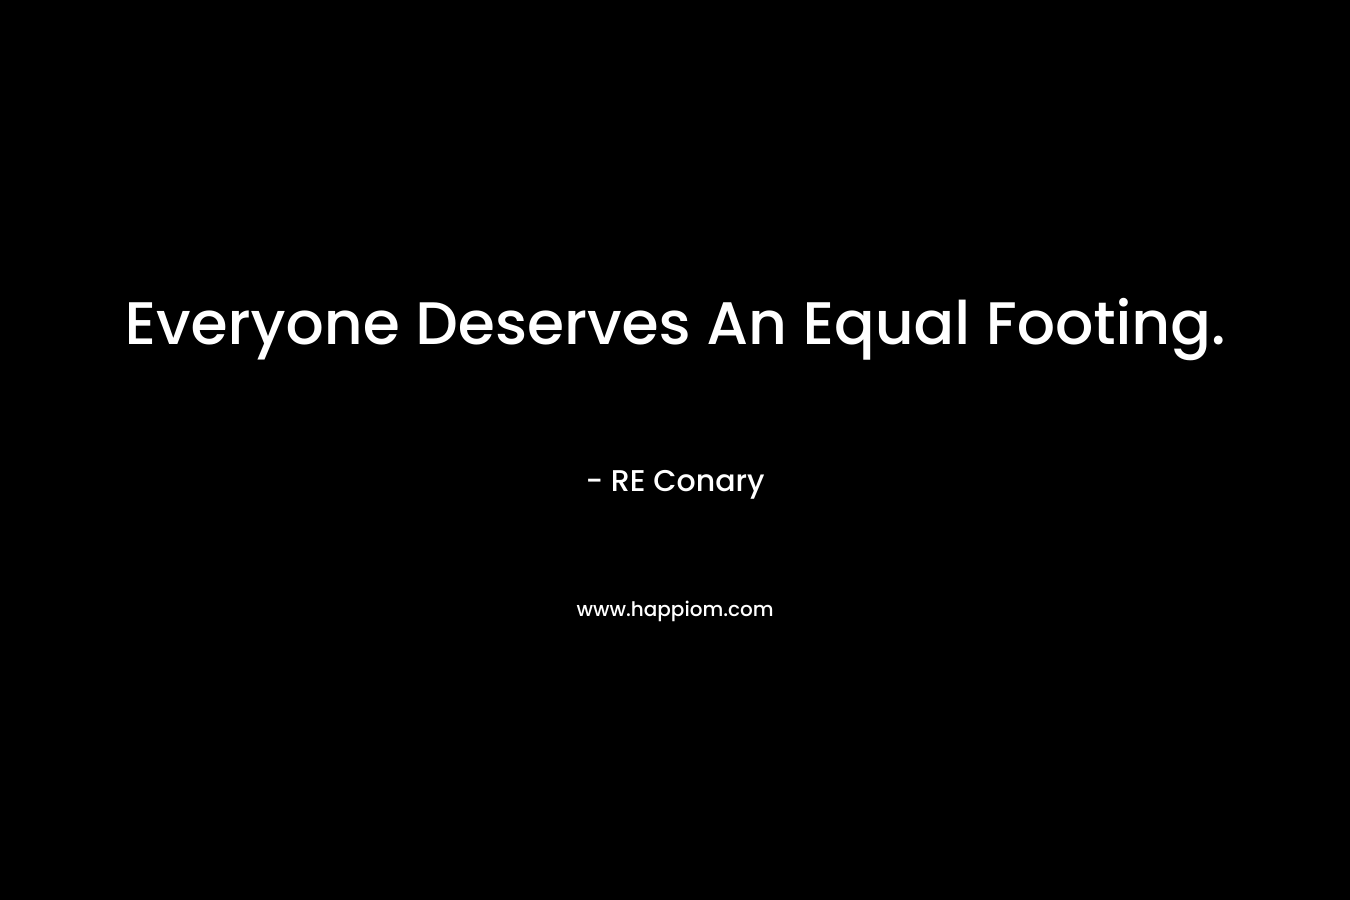 Everyone Deserves An Equal Footing. – RE Conary